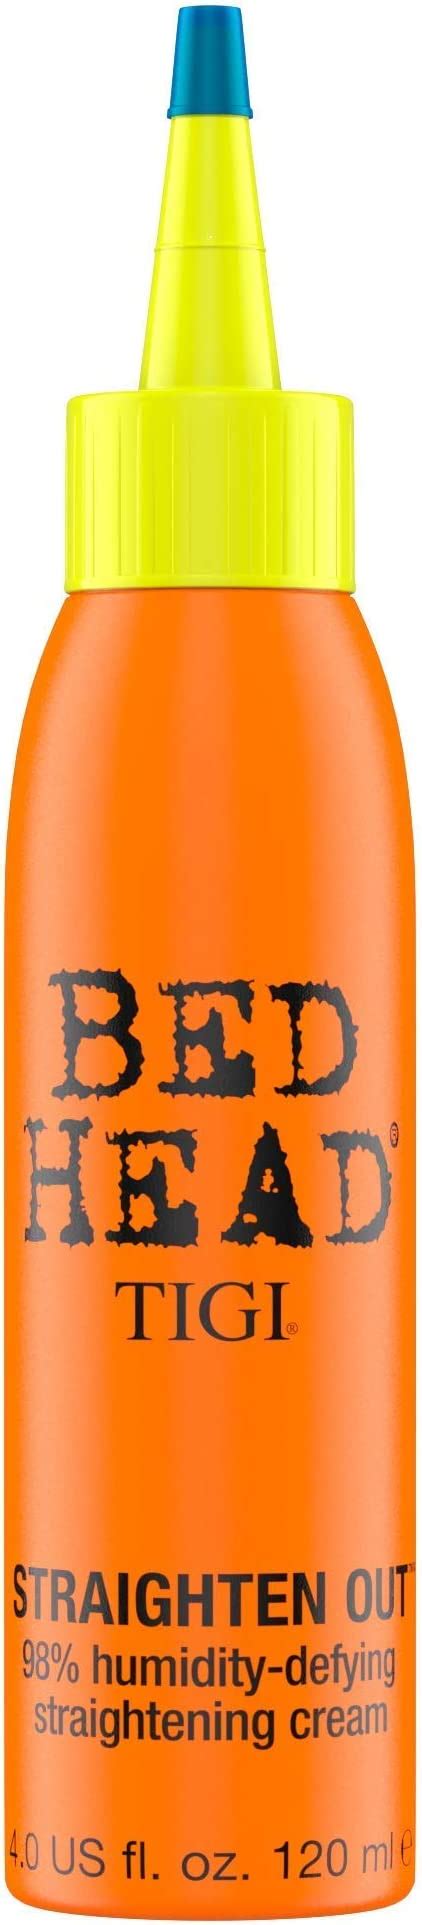 Bed Head By Tigi Straighten Out Straightening Cream For Frizzy Hair 120